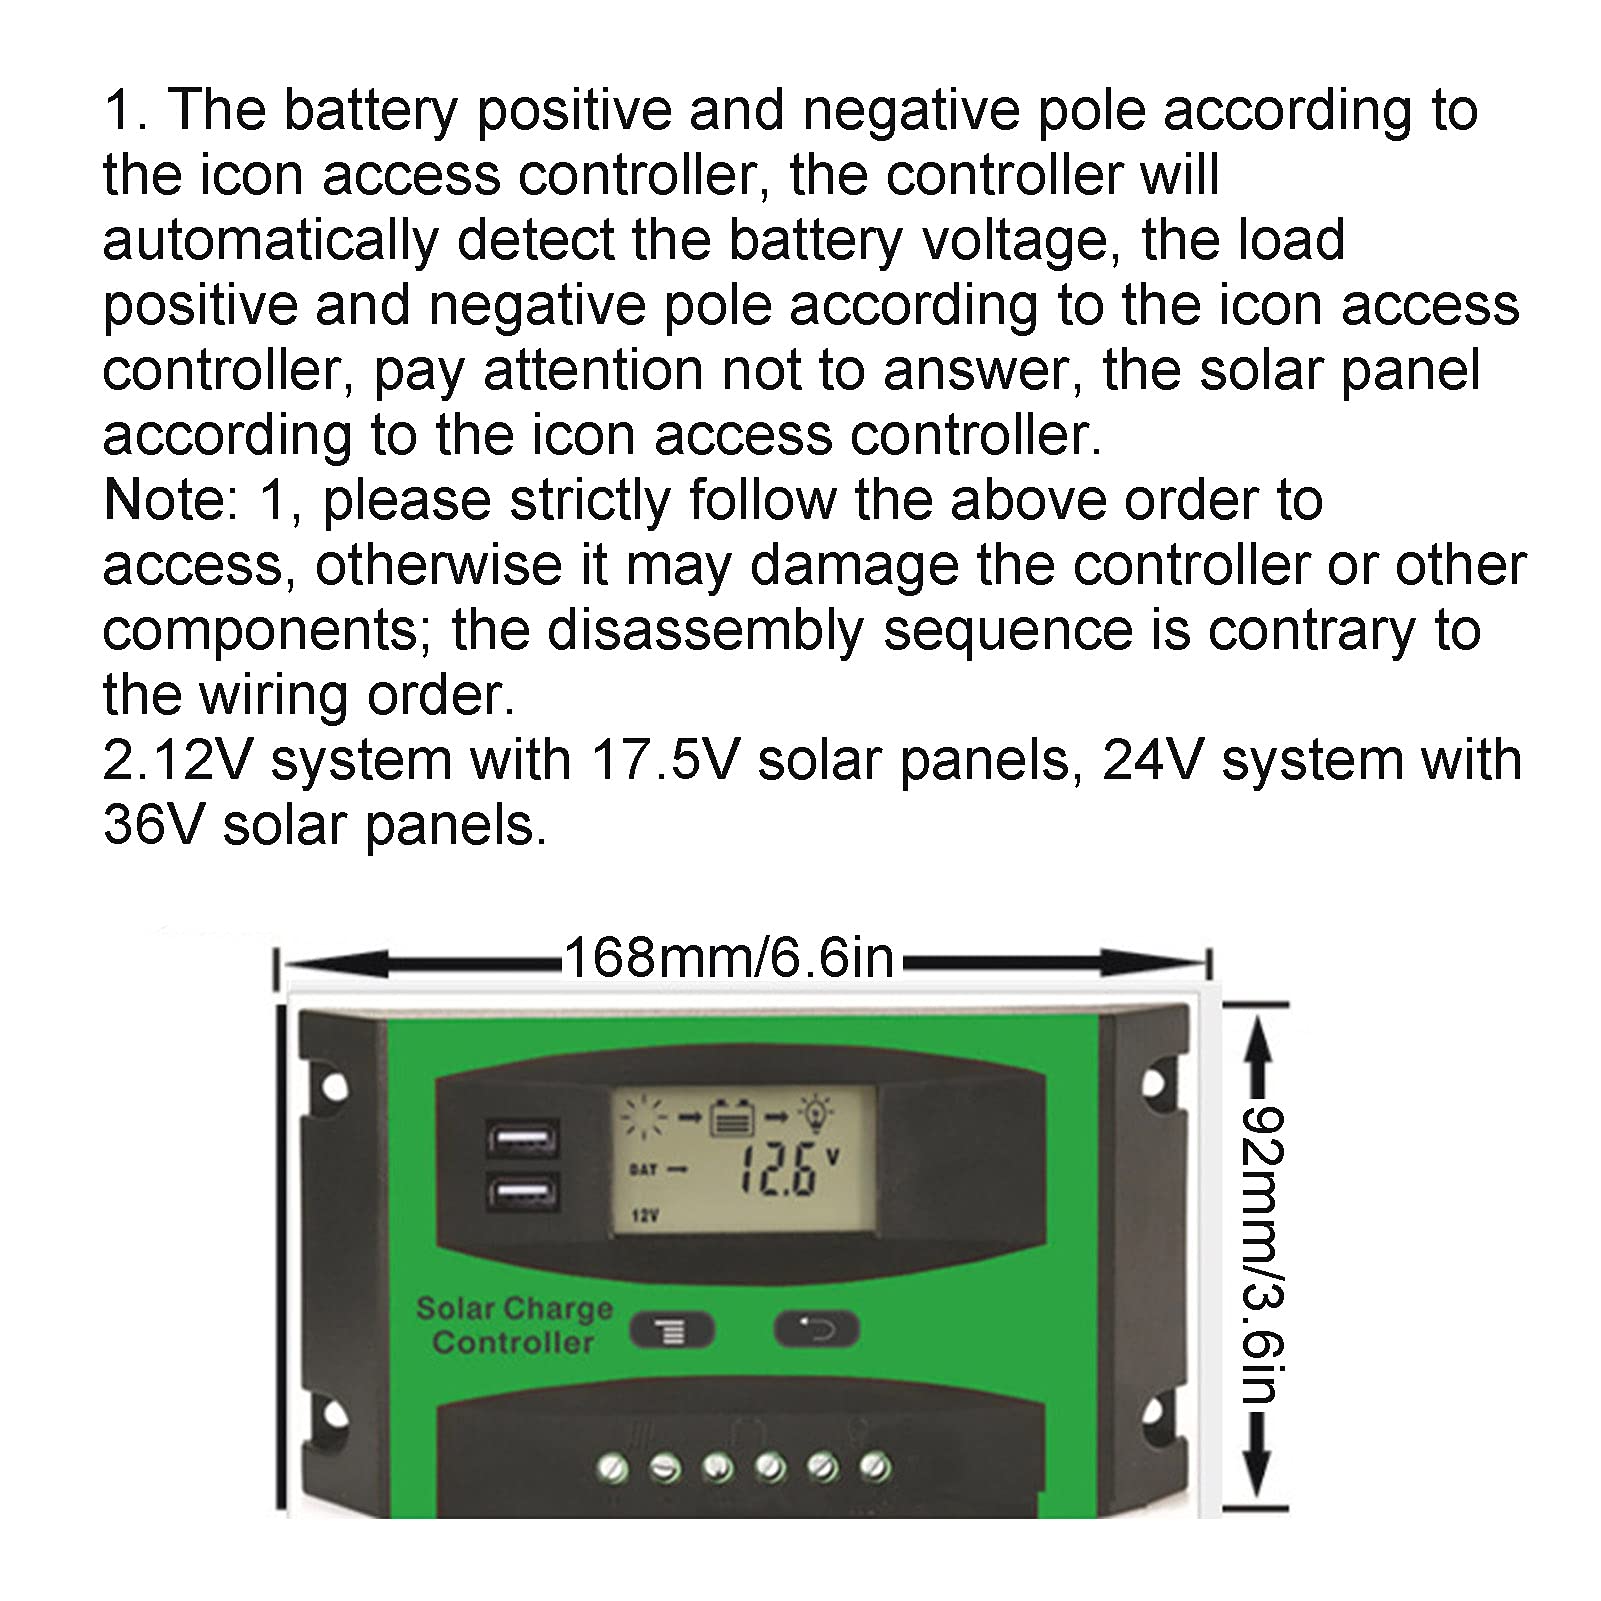 Natudeco 30 Amp Solar Charge Controller, Charge Controllers for Solar Panels Photovoltaic Discharge PWM Control Regulator Renewable Energy Controllers Solar Electric Fence Charger 12-24V 30A LD3024U